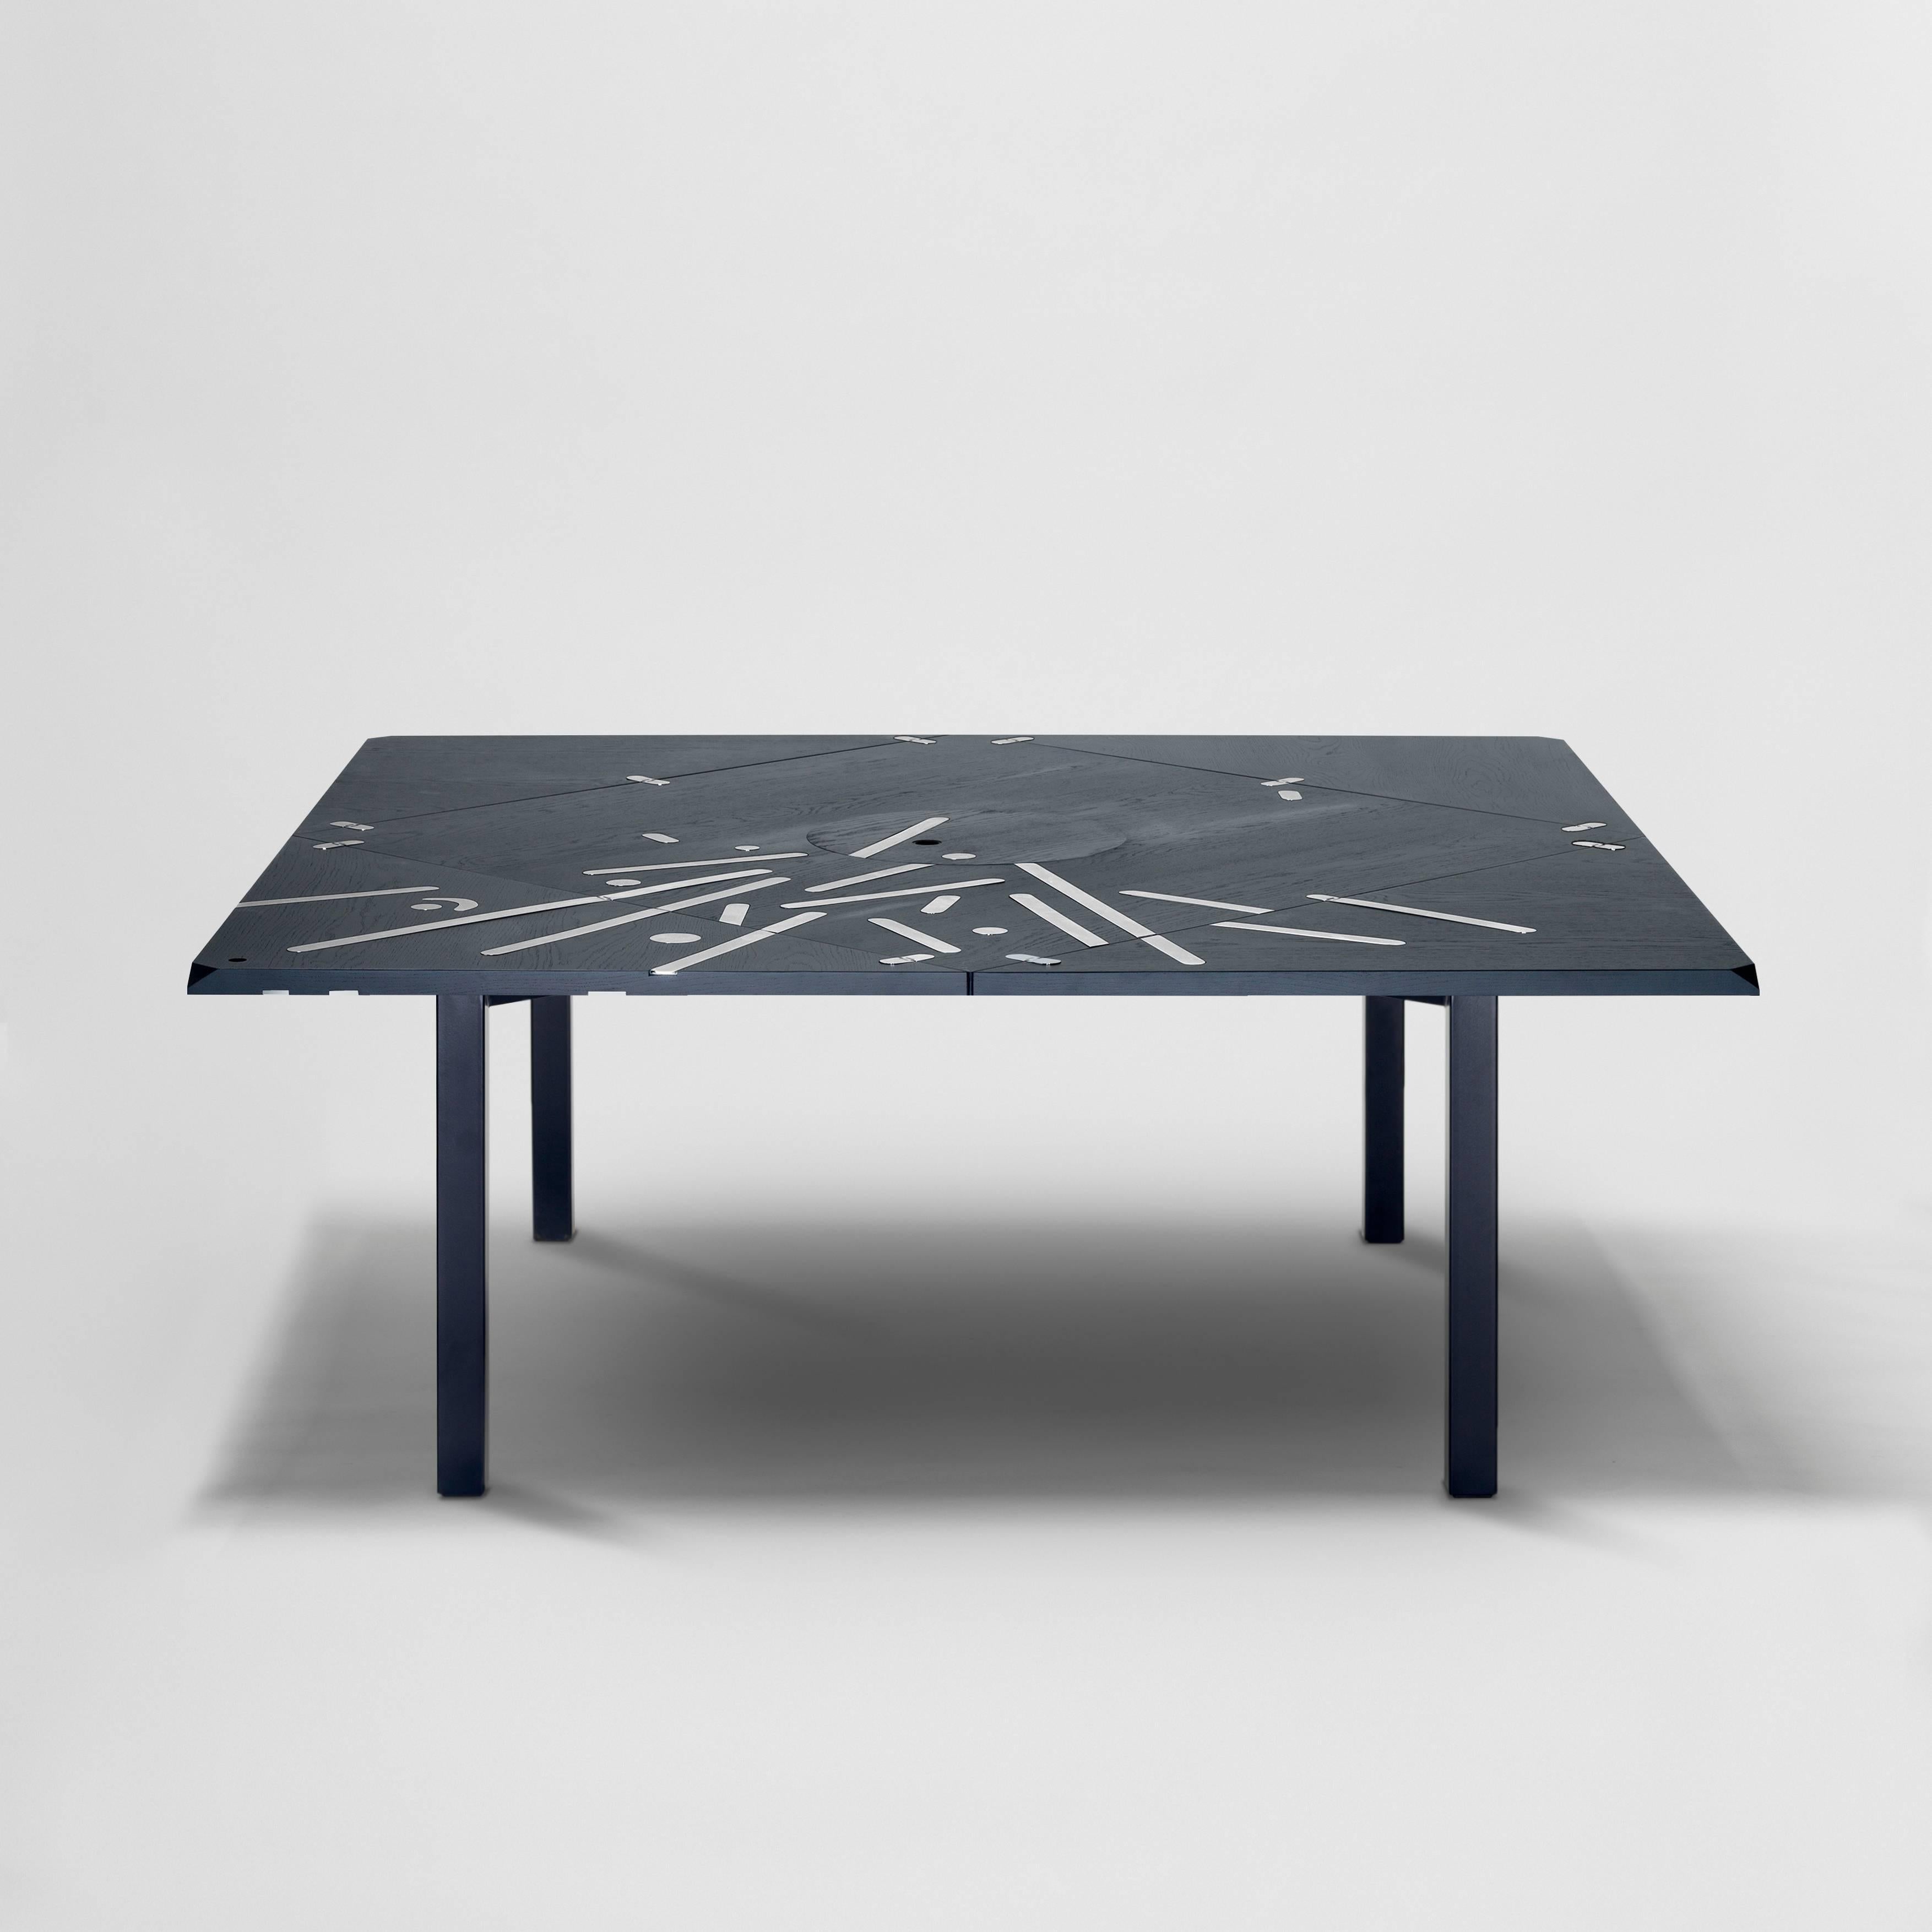 Spanish Limited Edition Alella Table by Lluís Clotet by BD For Sale